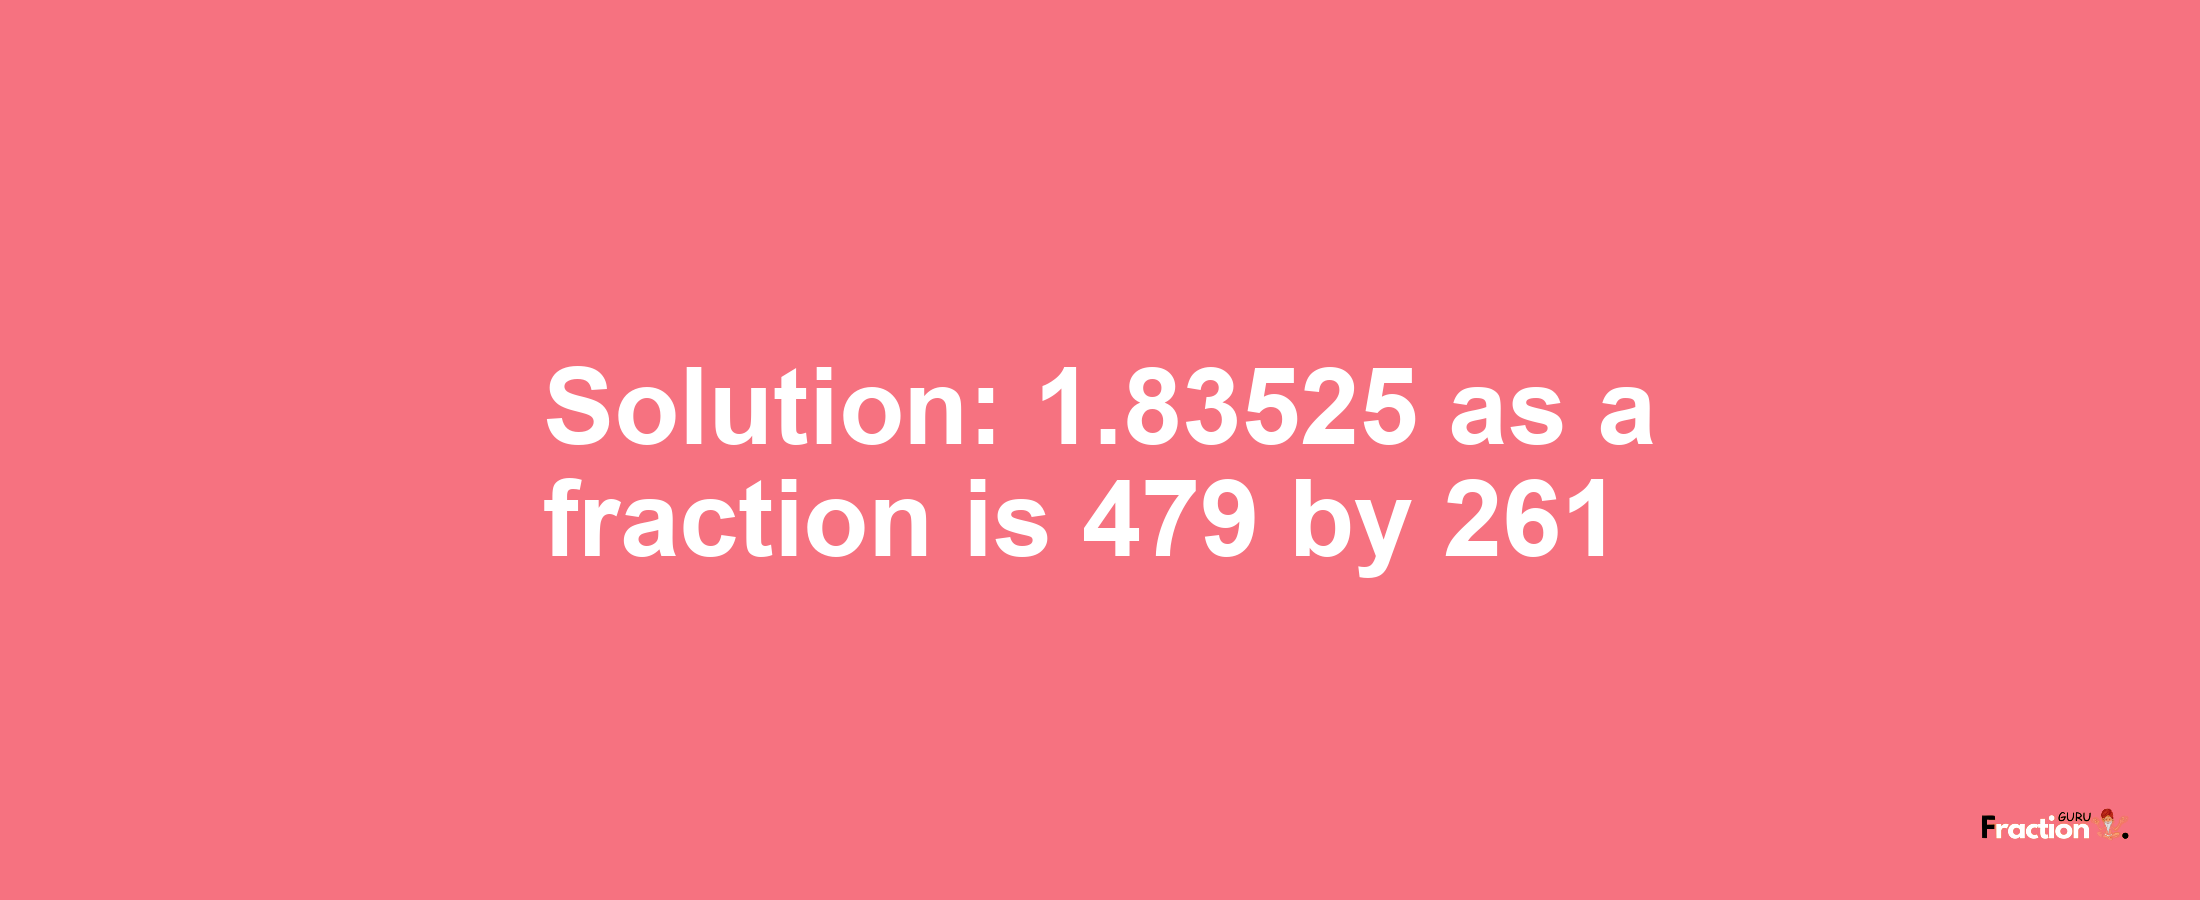 Solution:1.83525 as a fraction is 479/261